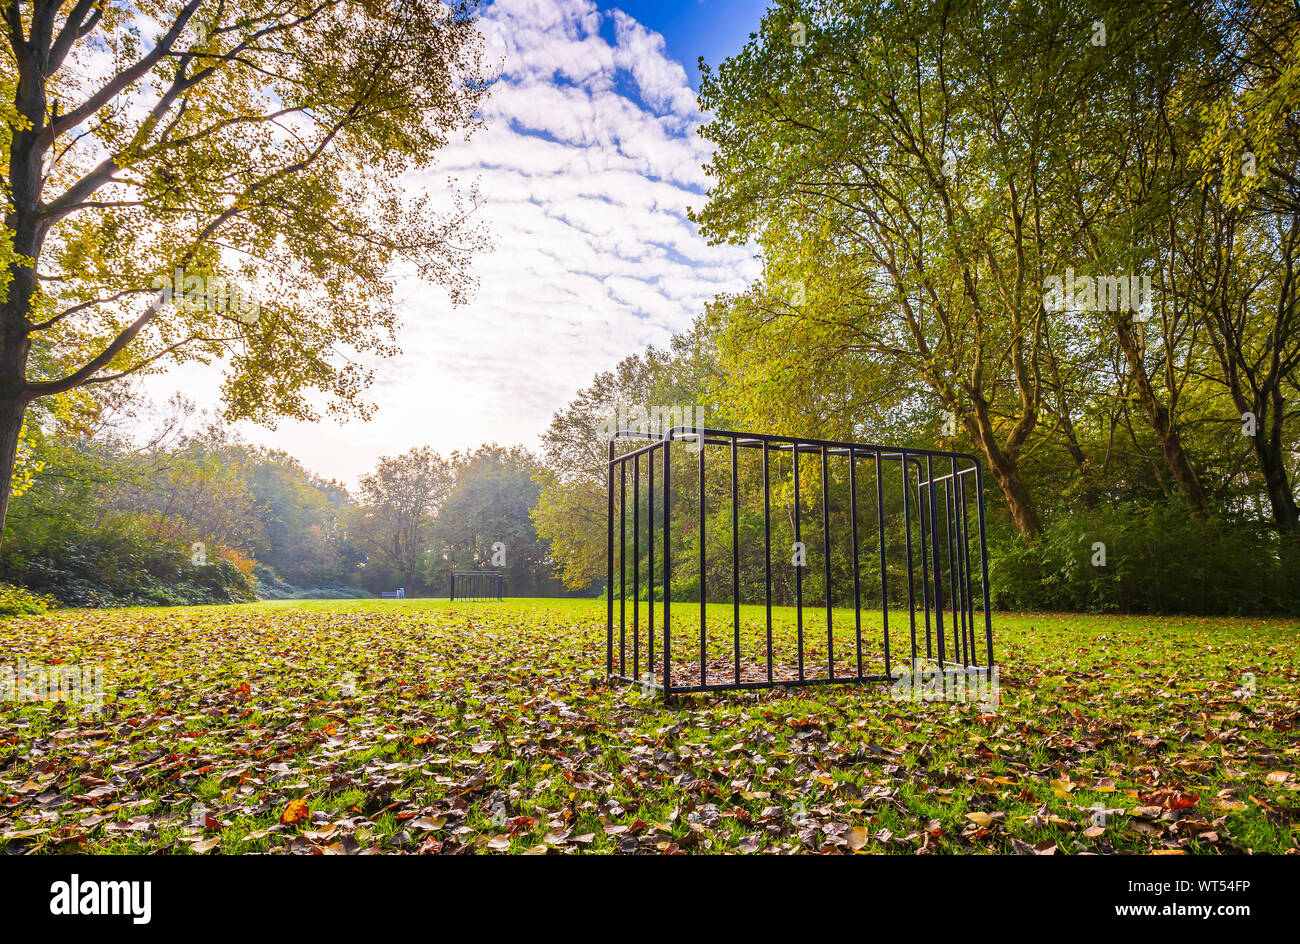 Abandoned soccer goal play ground, grass field on a beautiful Autumn day. Nice sunlight and vibrant colors. HDR, High dynamic range, Stock Photo